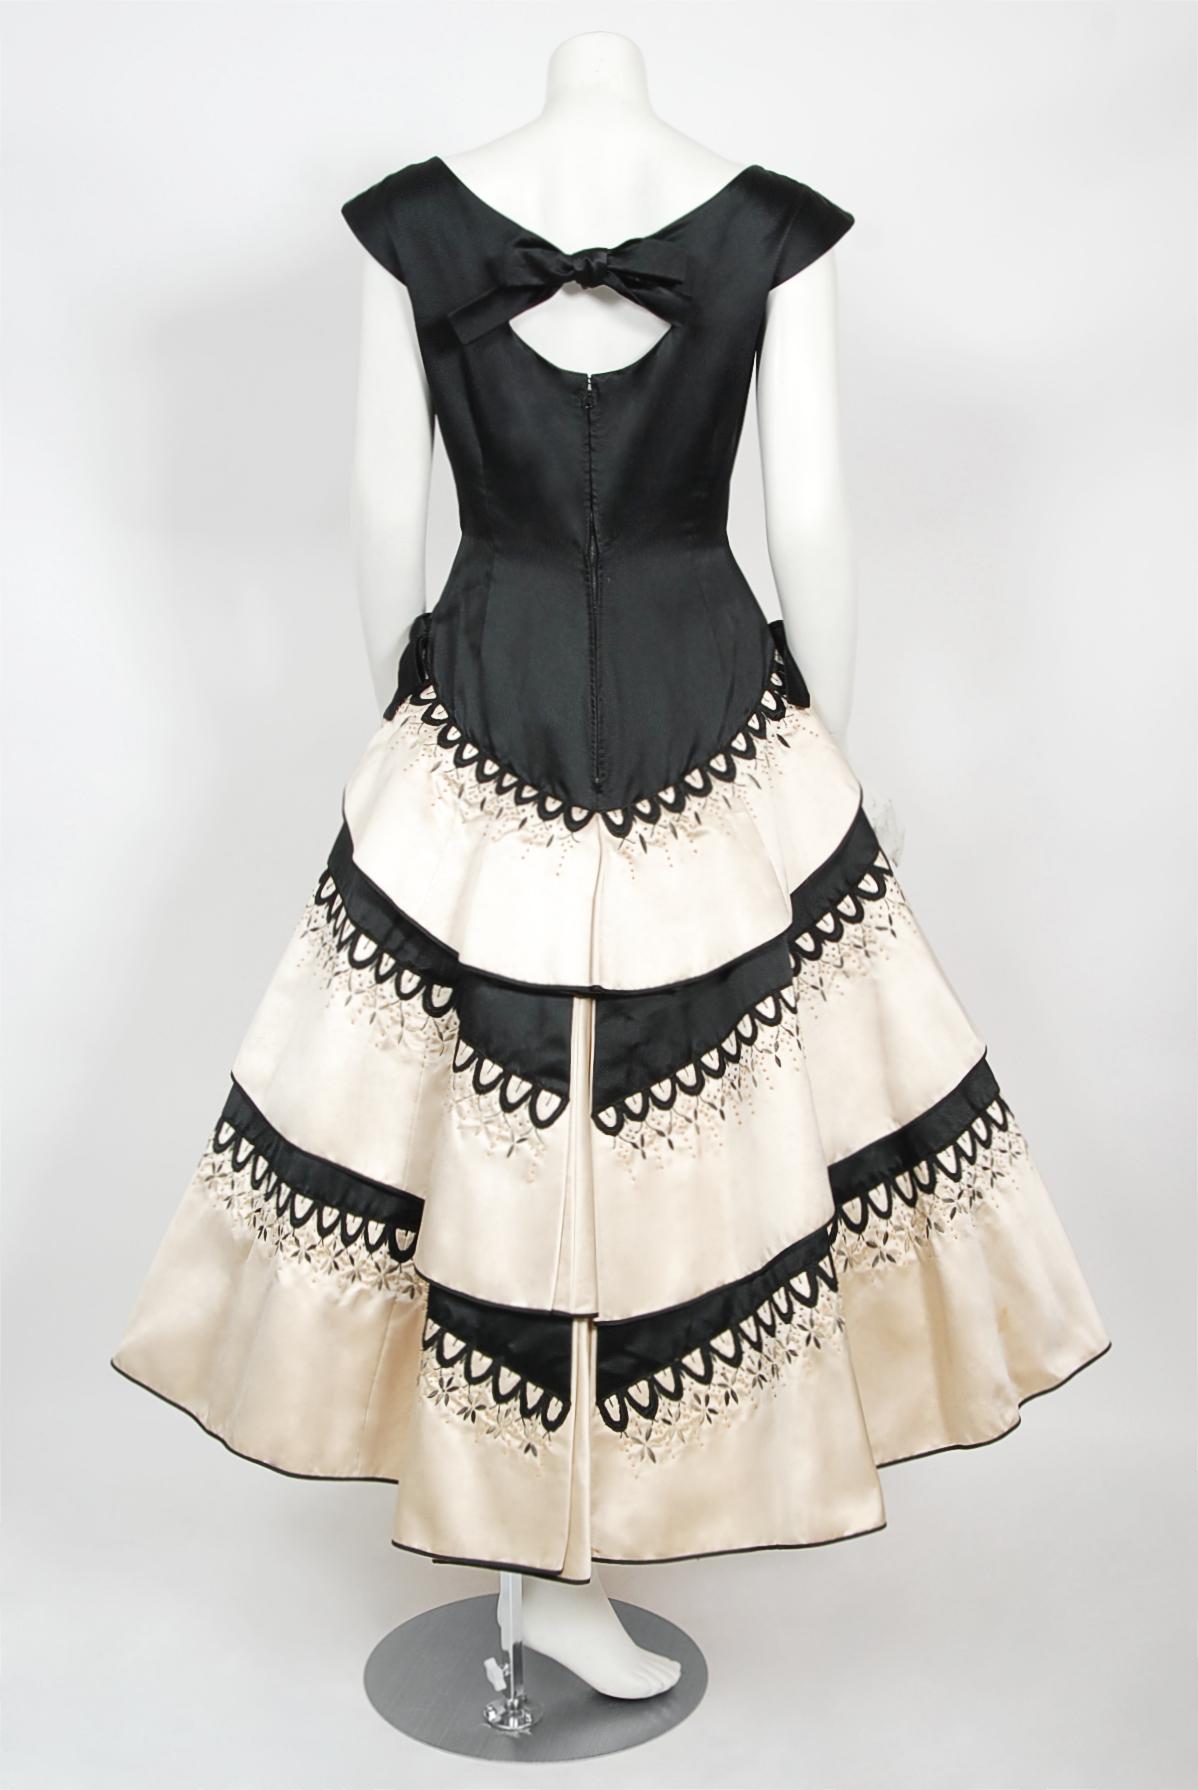 Vintage 1950's Emilio Schuberth Couture Black & Ivory Embroidered Satin Dress For Sale 10